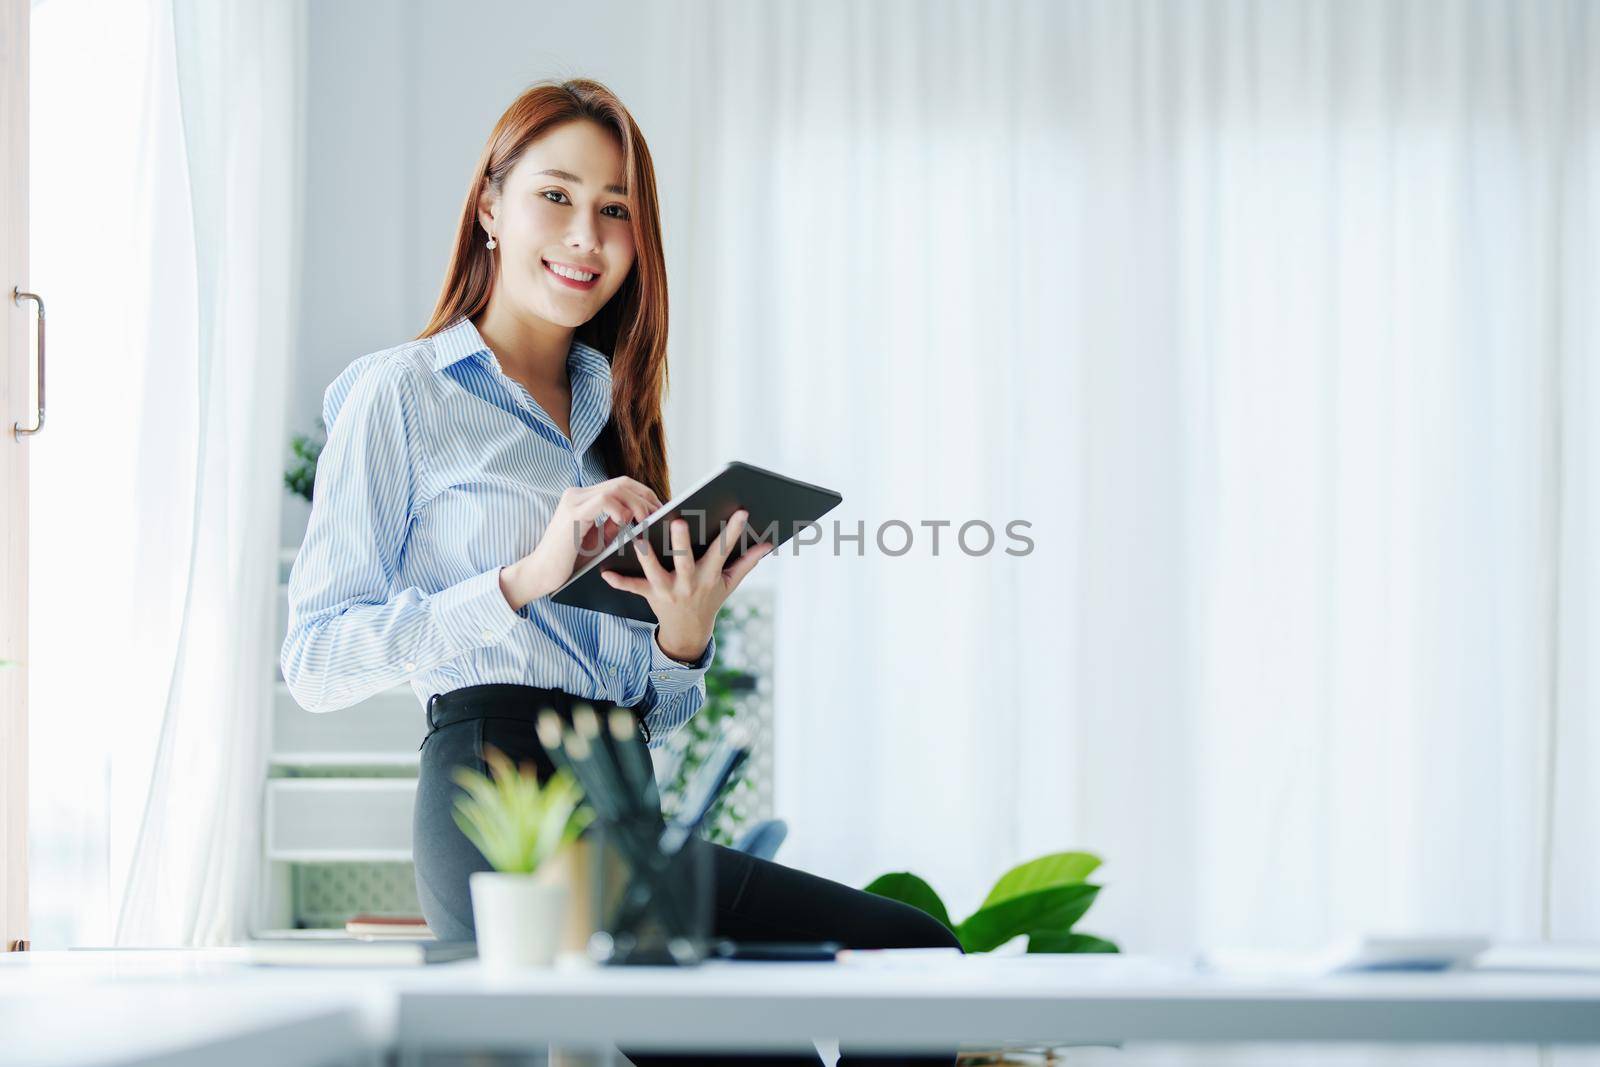 Entrepreneurs, Business Owners, Accountants, Portrait of a Small Business Startup Asians showing happy smiling faces with tablets at work